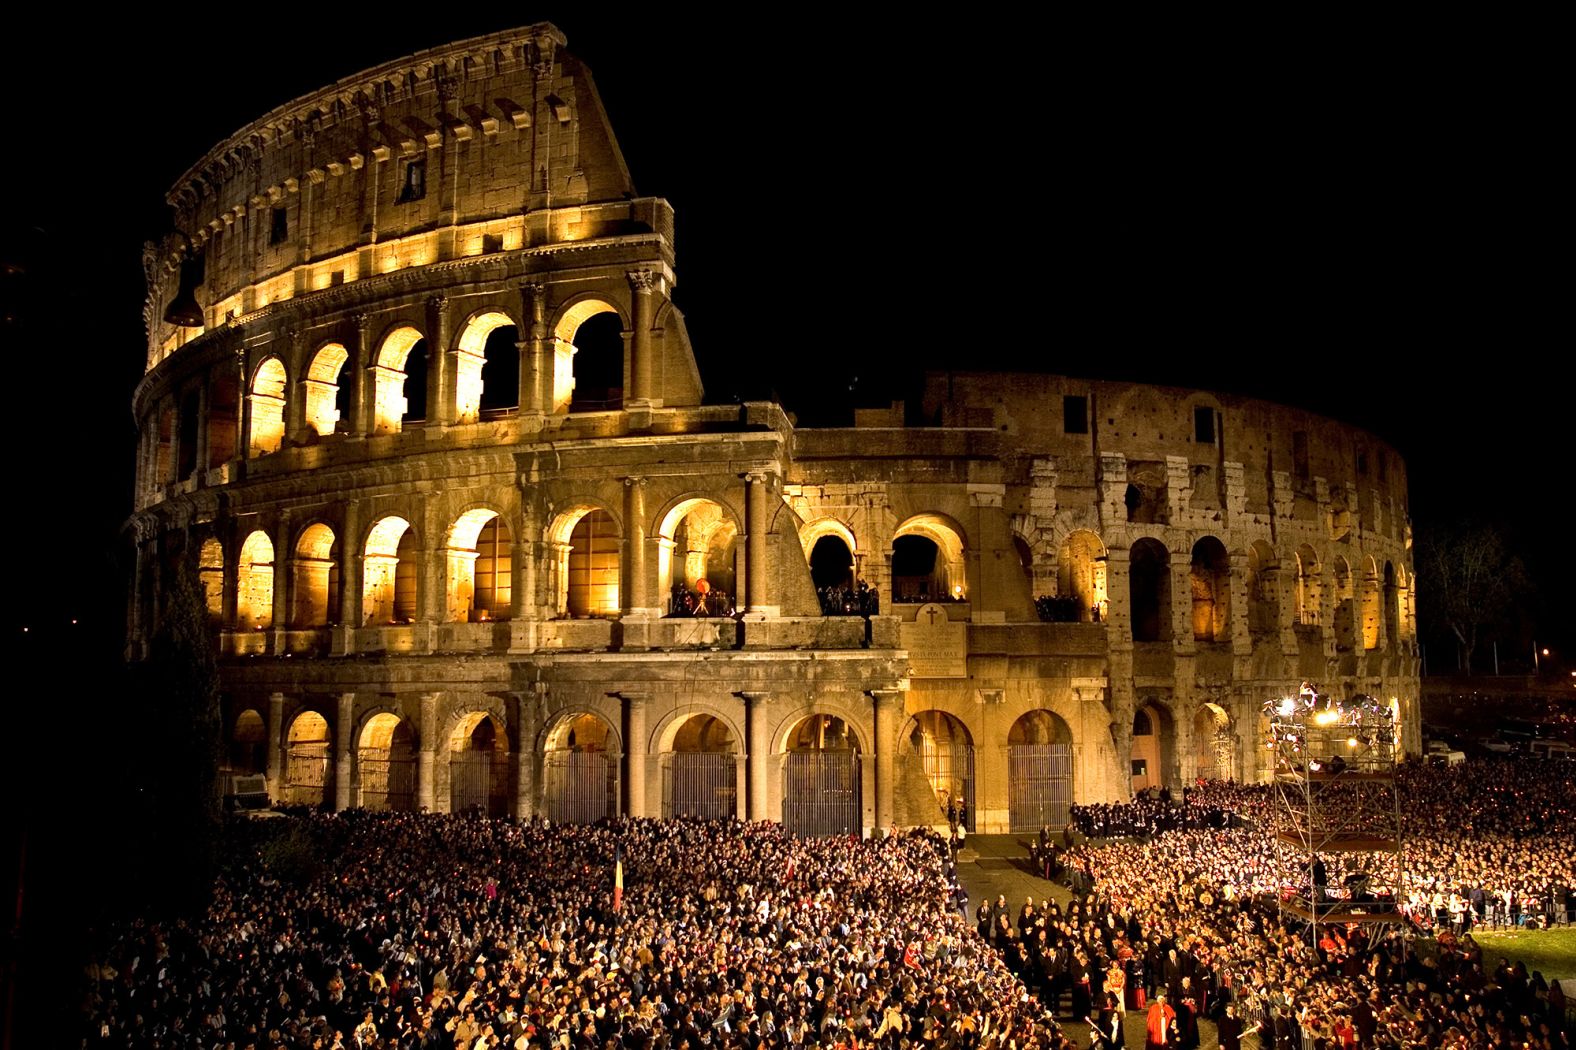 People gather in front of the Roman Colosseum during Benedict's first Way of the Cross devotions in April 2006.